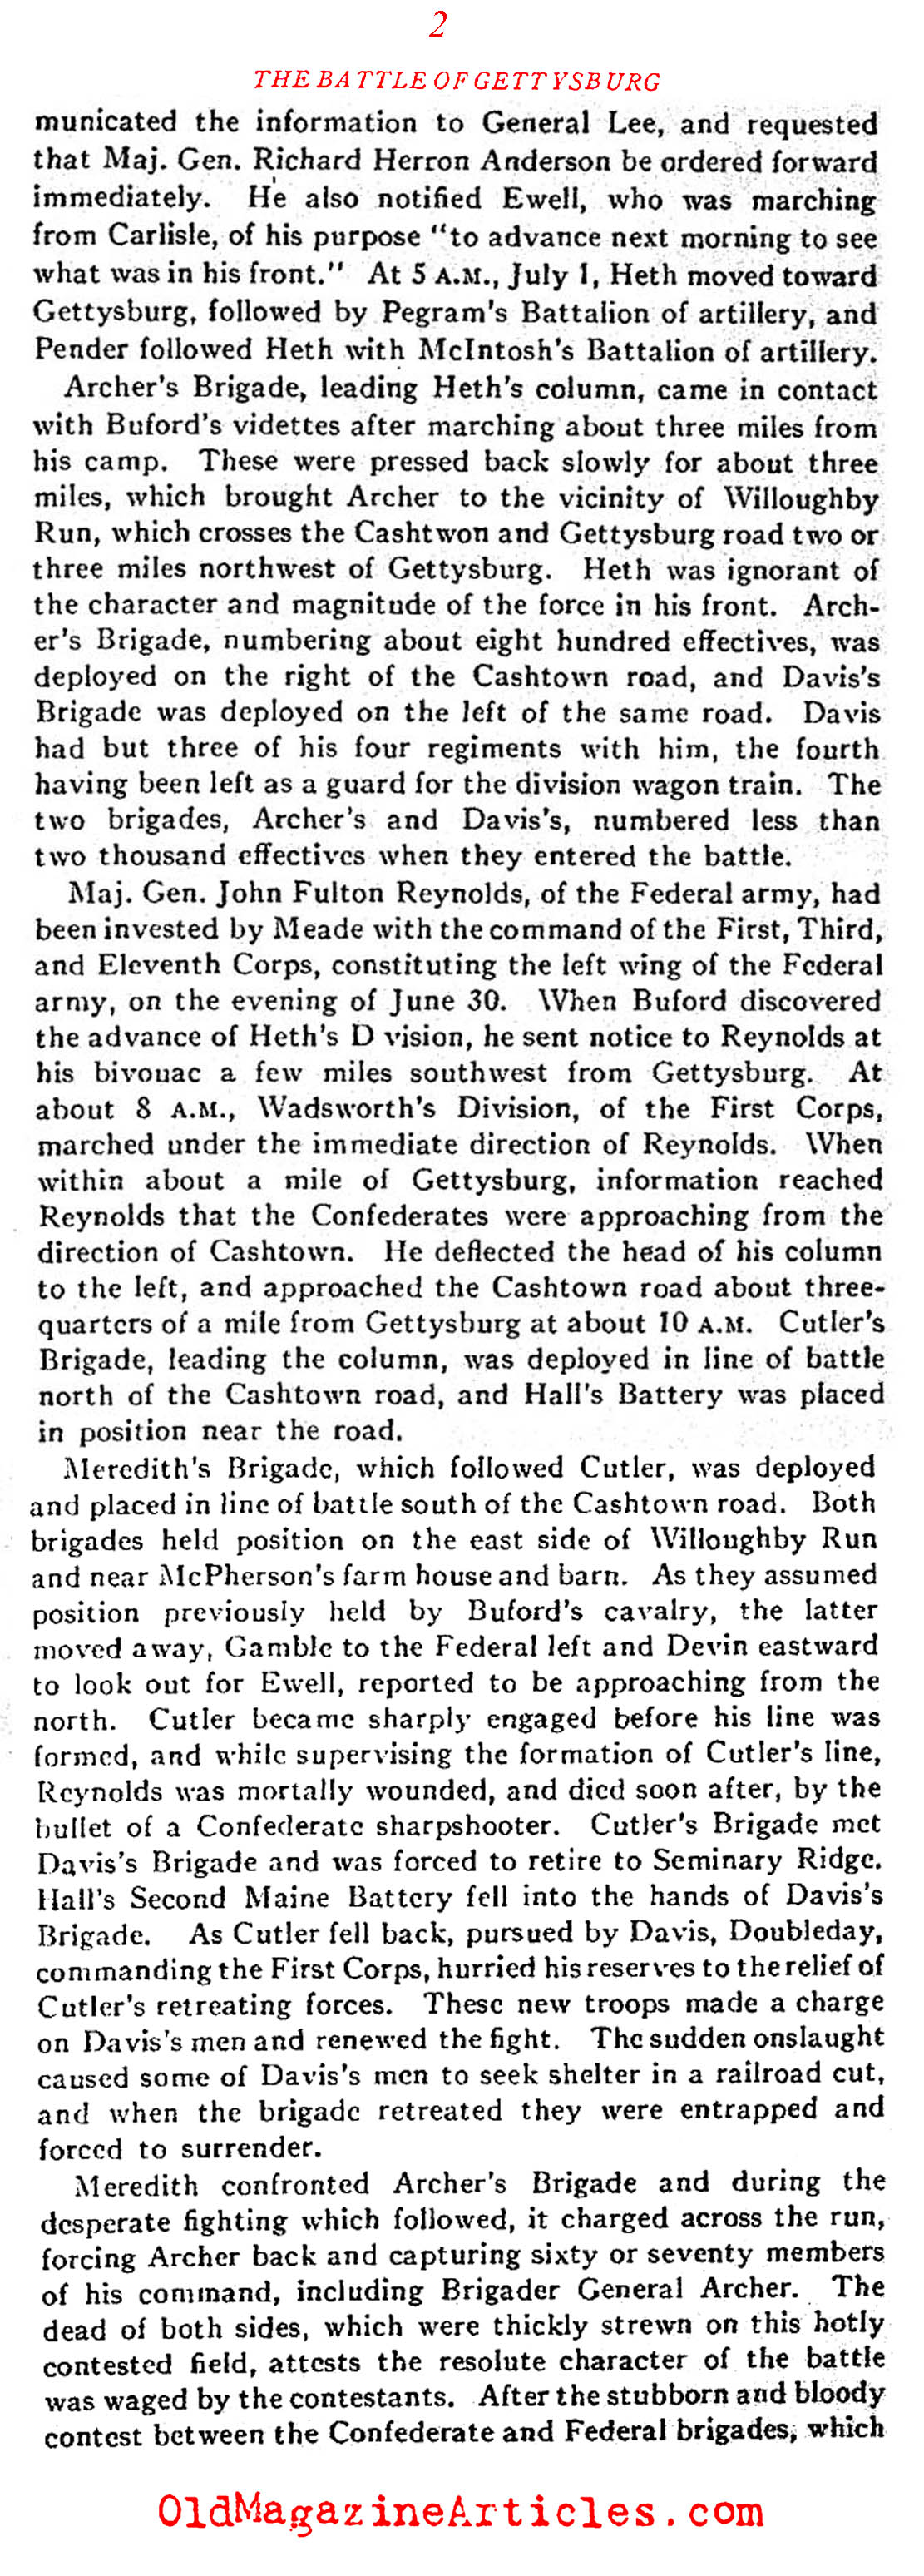 The Confederate Error on the First Day at Gettysburg (Confederate Veteran Magazine, 1923)